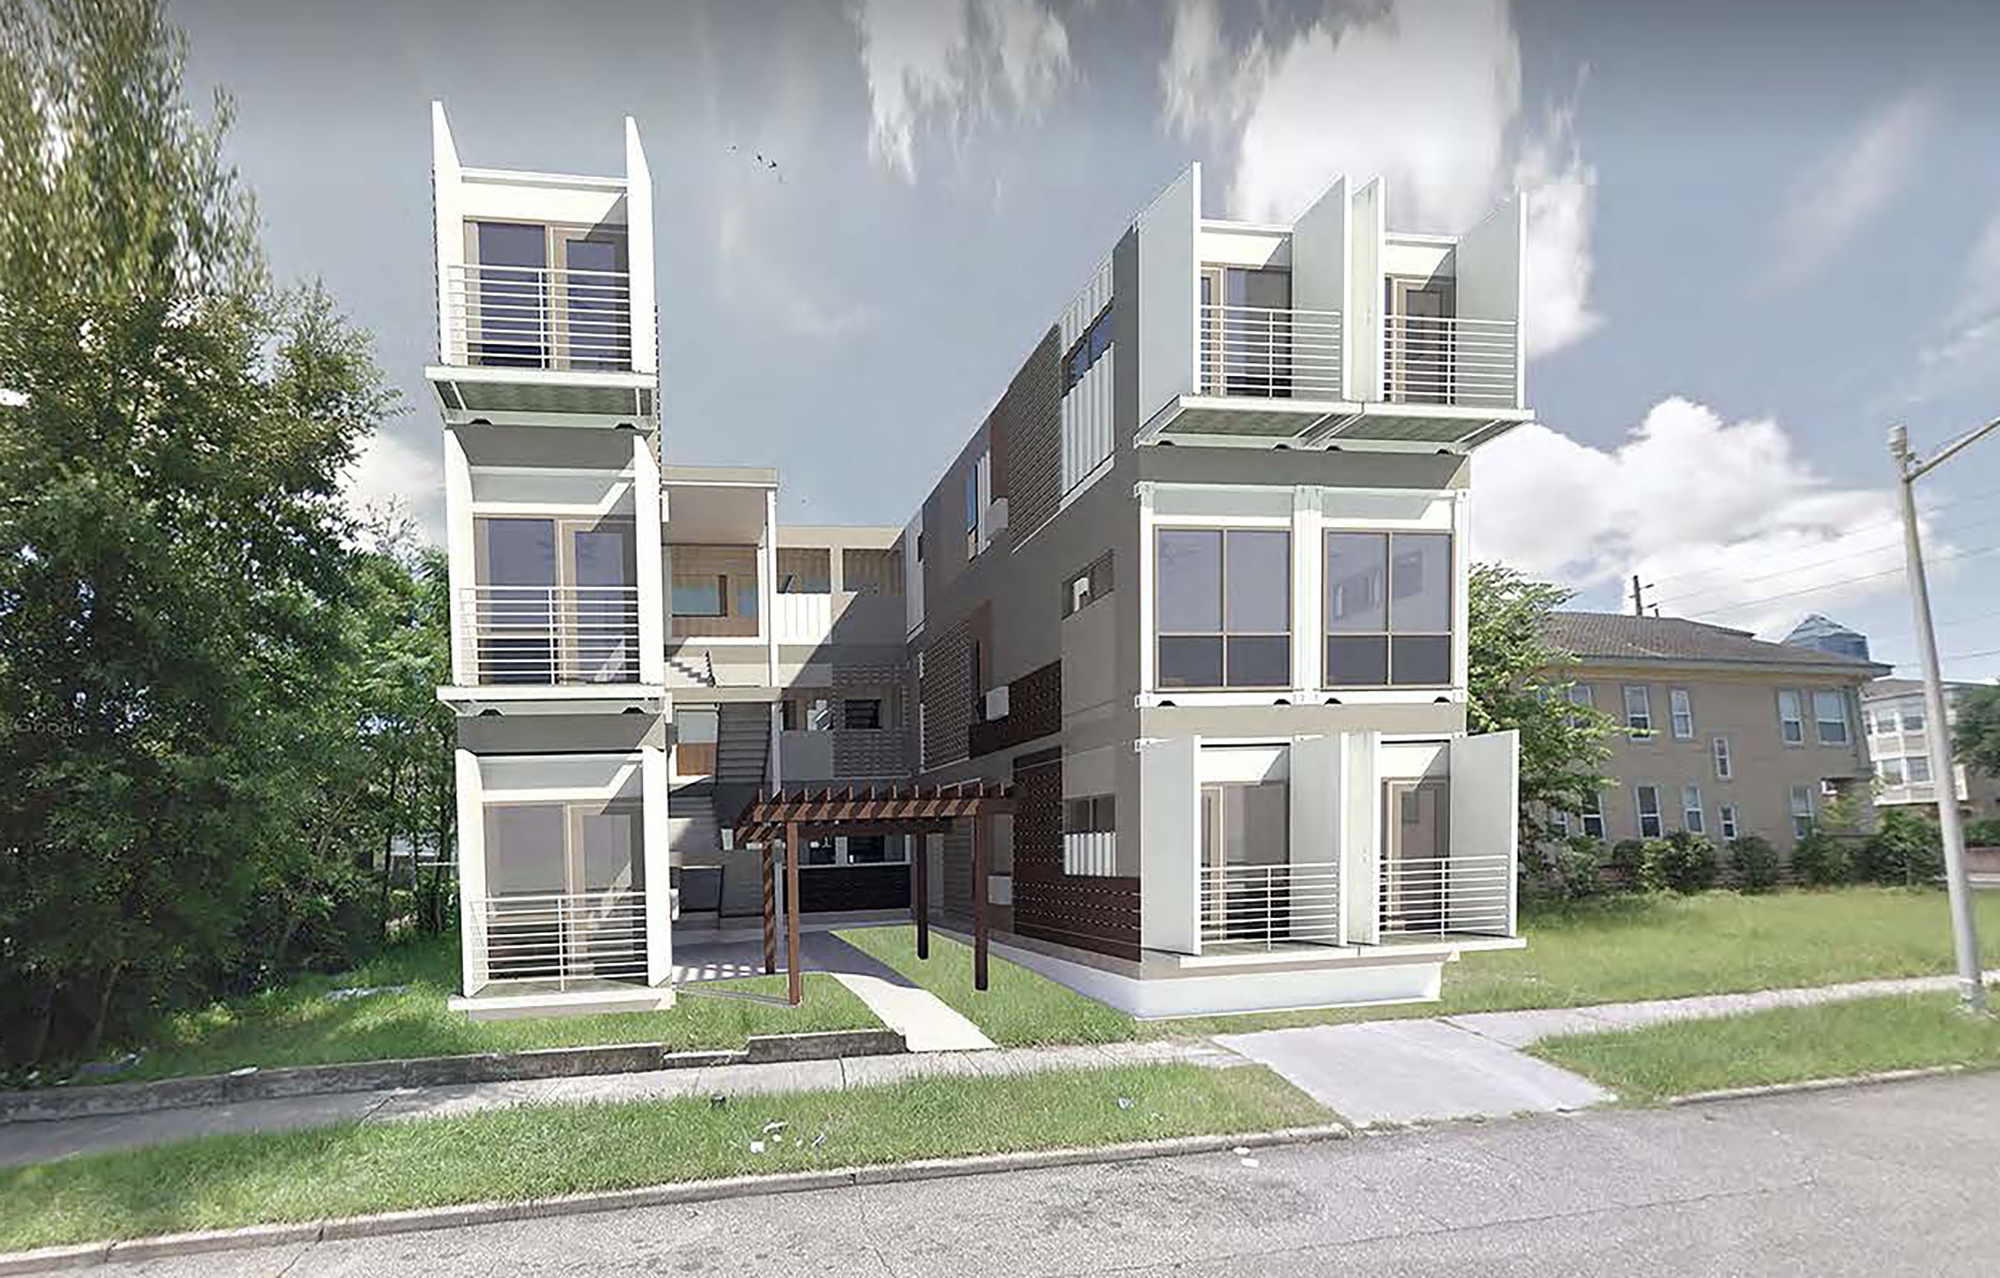 An apartment community of shipping containers is planned for the Cathedral District area of Downtown.